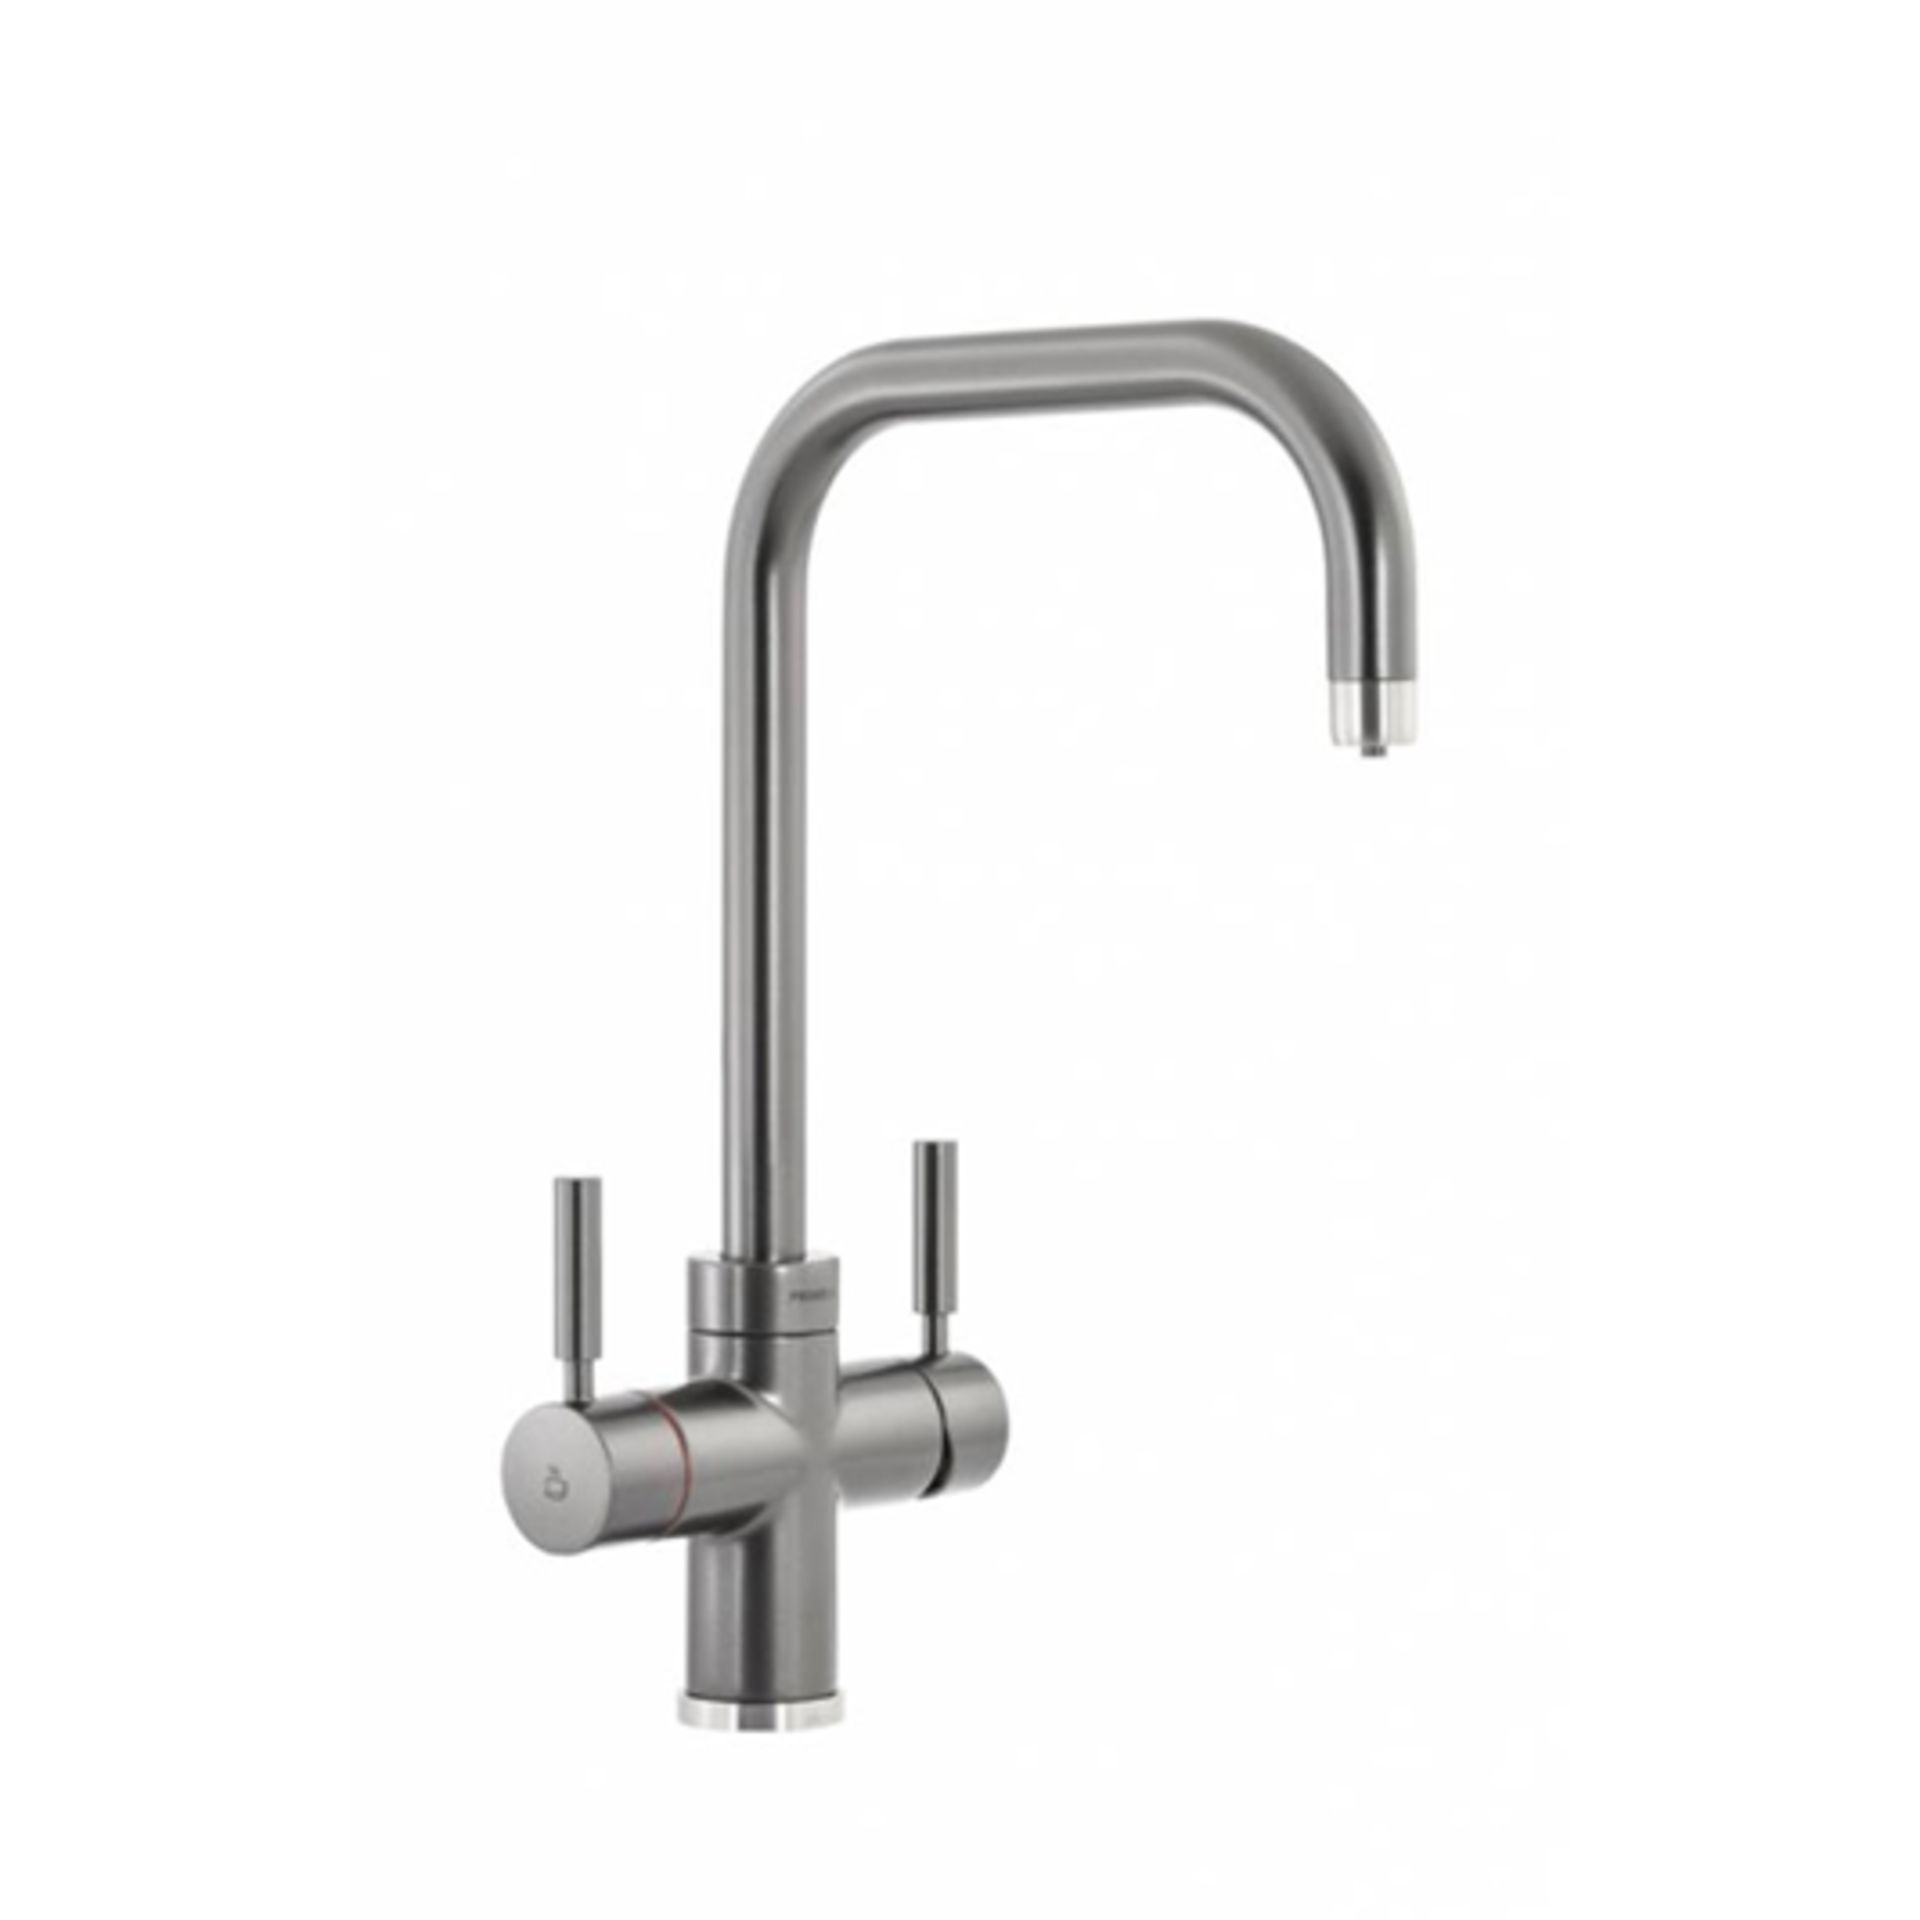 New (T2) Abode Pronteau 3 In 1 Boiling Water Tap - Prostyle - Brushed Nickel. RRP £749.17. Eve...